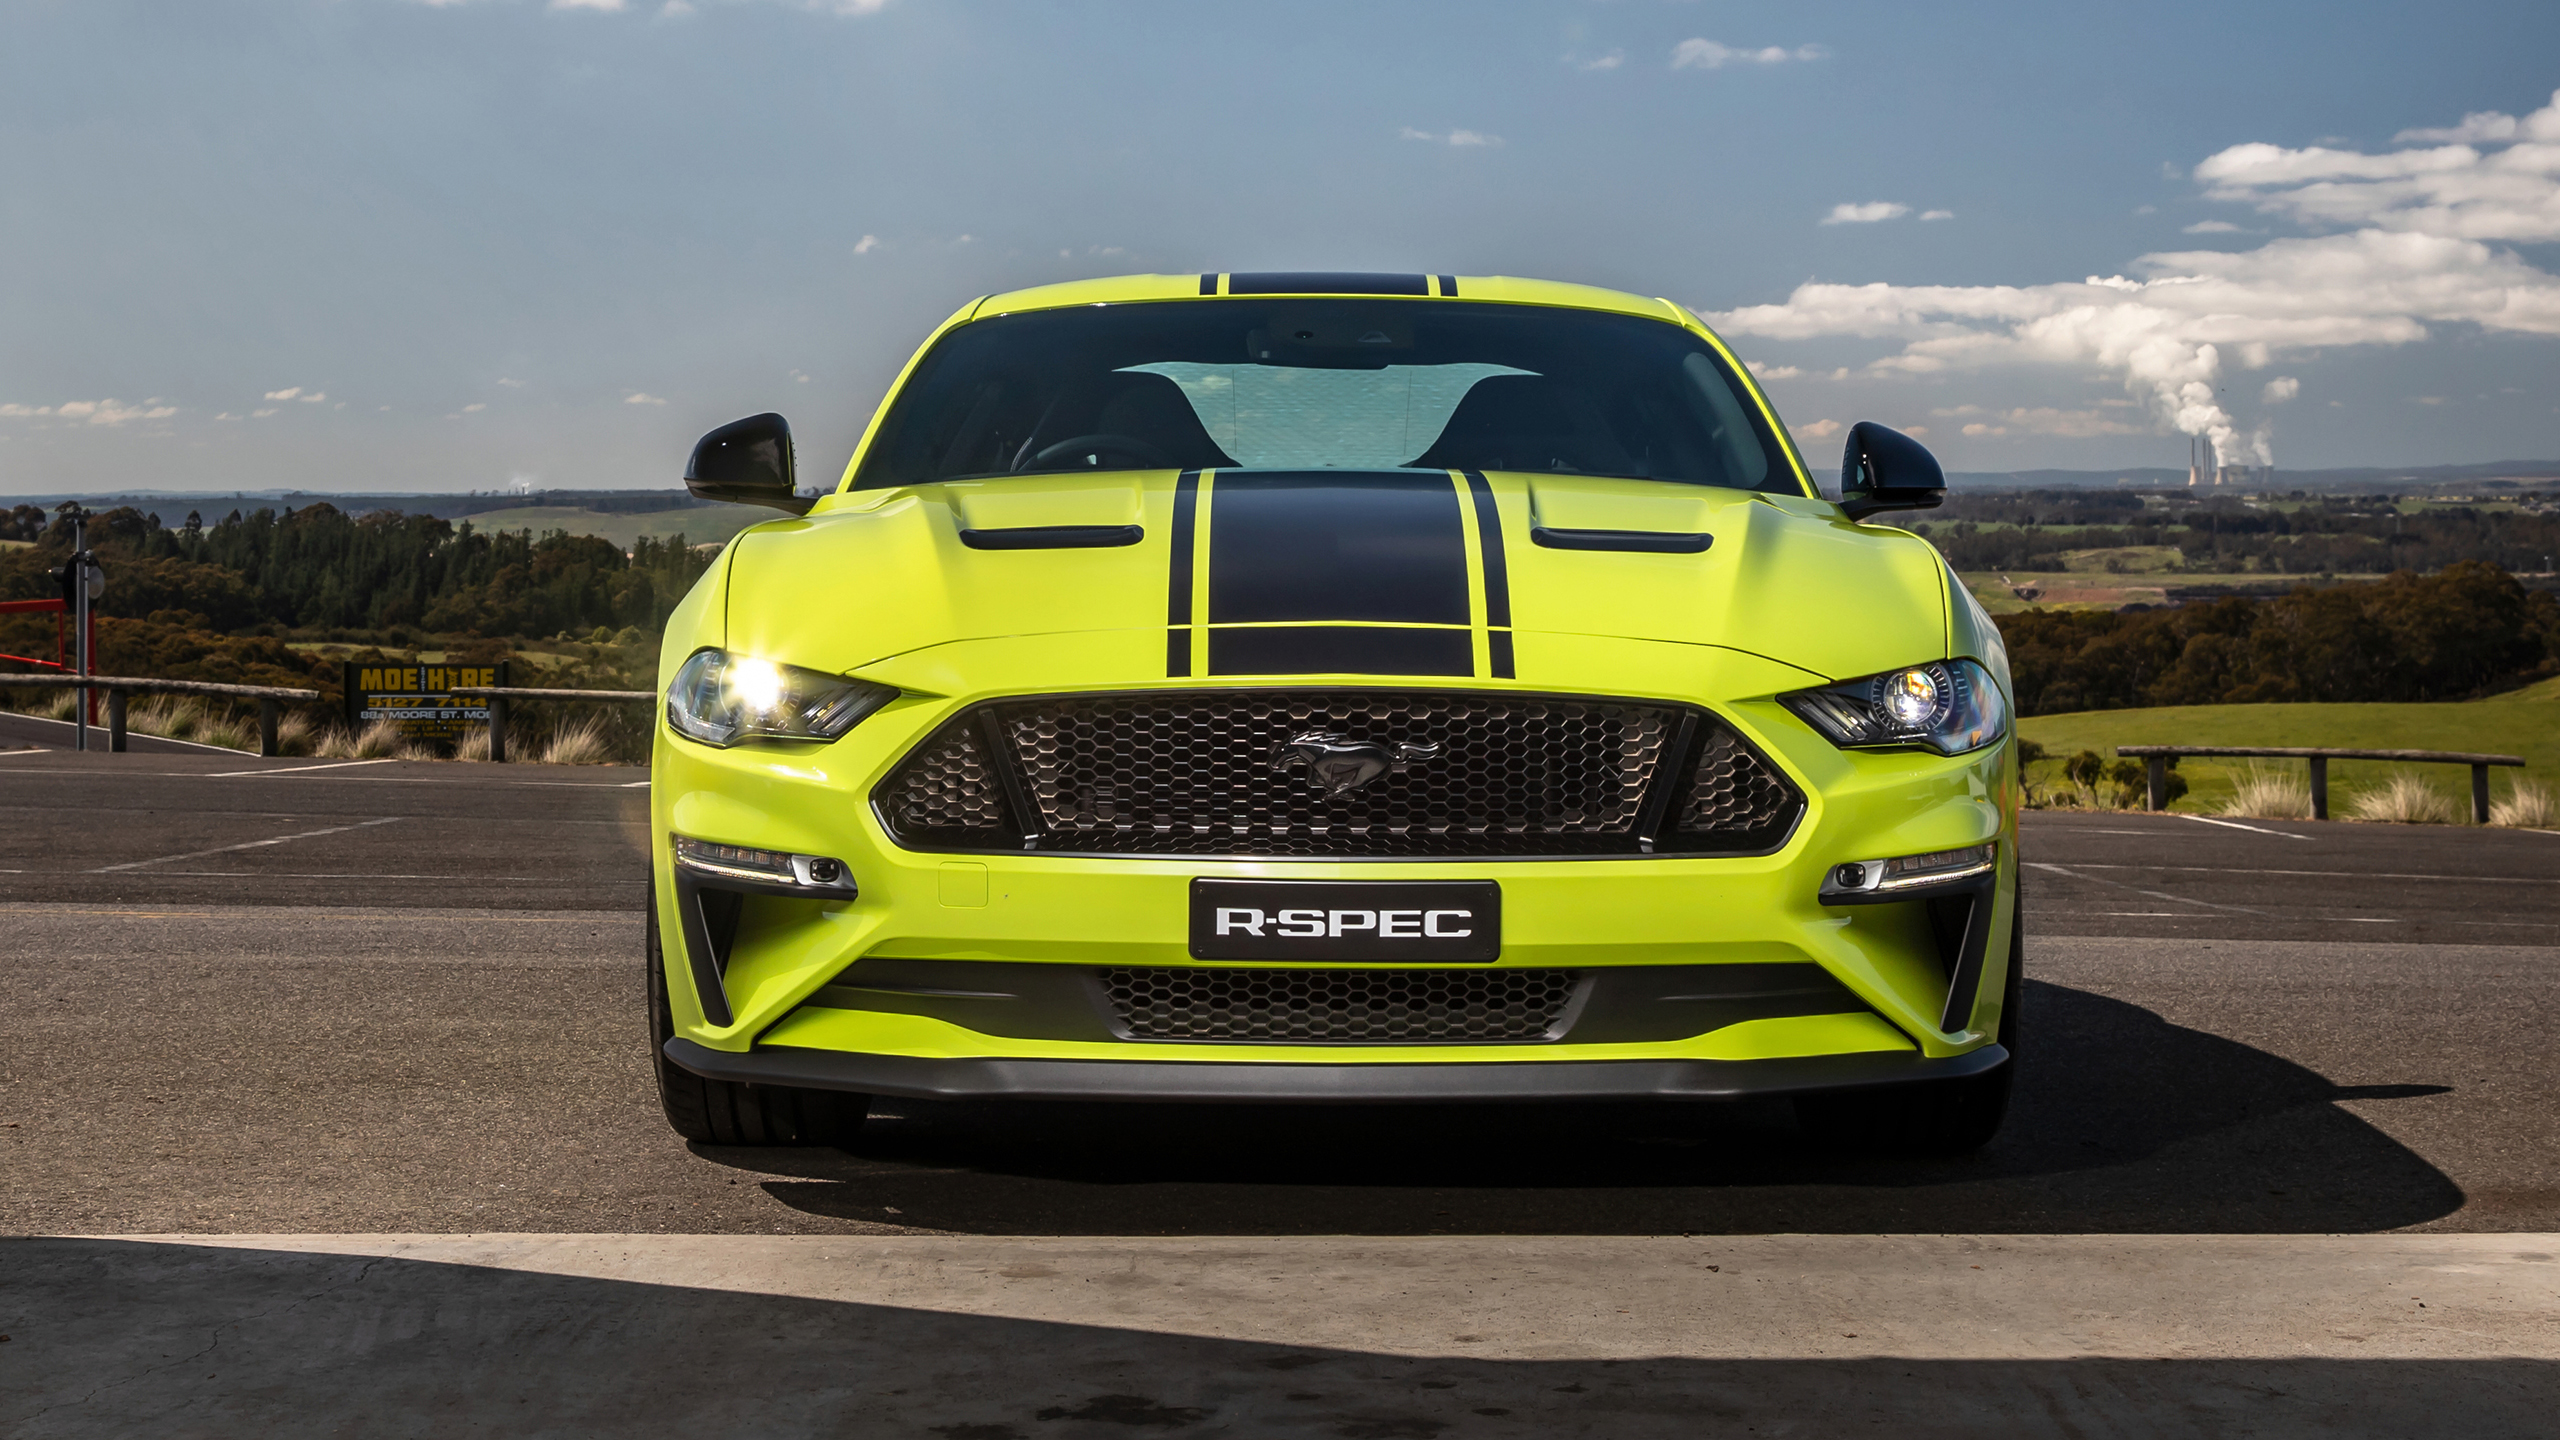 Ford Mustang GT Fastback R-SPEC 2019 2 Wallpaper - HD Car Wallpapers #13463